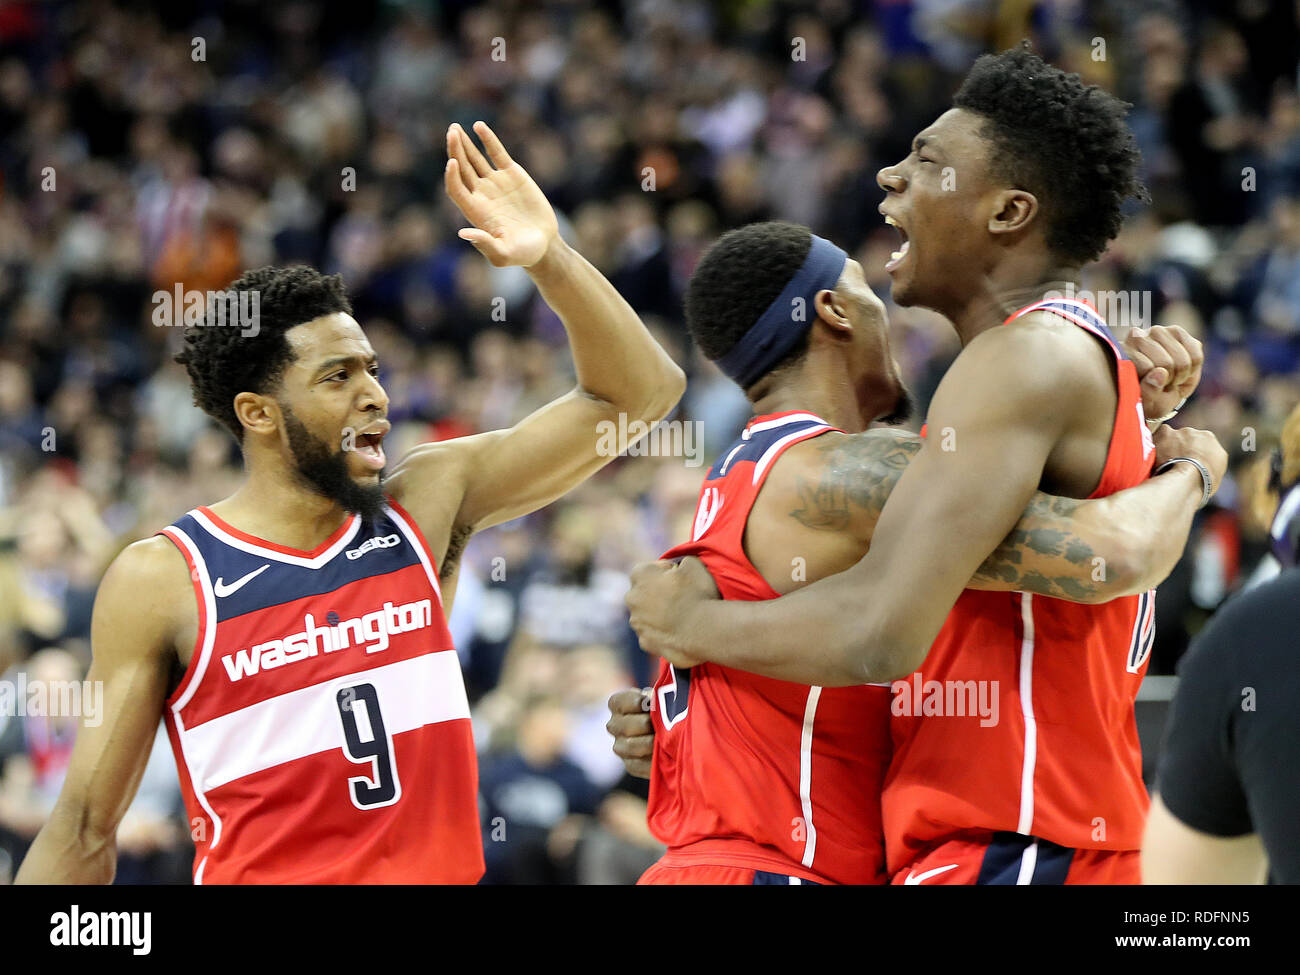 Washington Wizards' Thomas Bryant (right) celebrates with team-mates Bradley Beal (centre) and Chasson Randle after the final whistle during the NBA London Game 2019 at the O2 Arena, London. Stock Photo